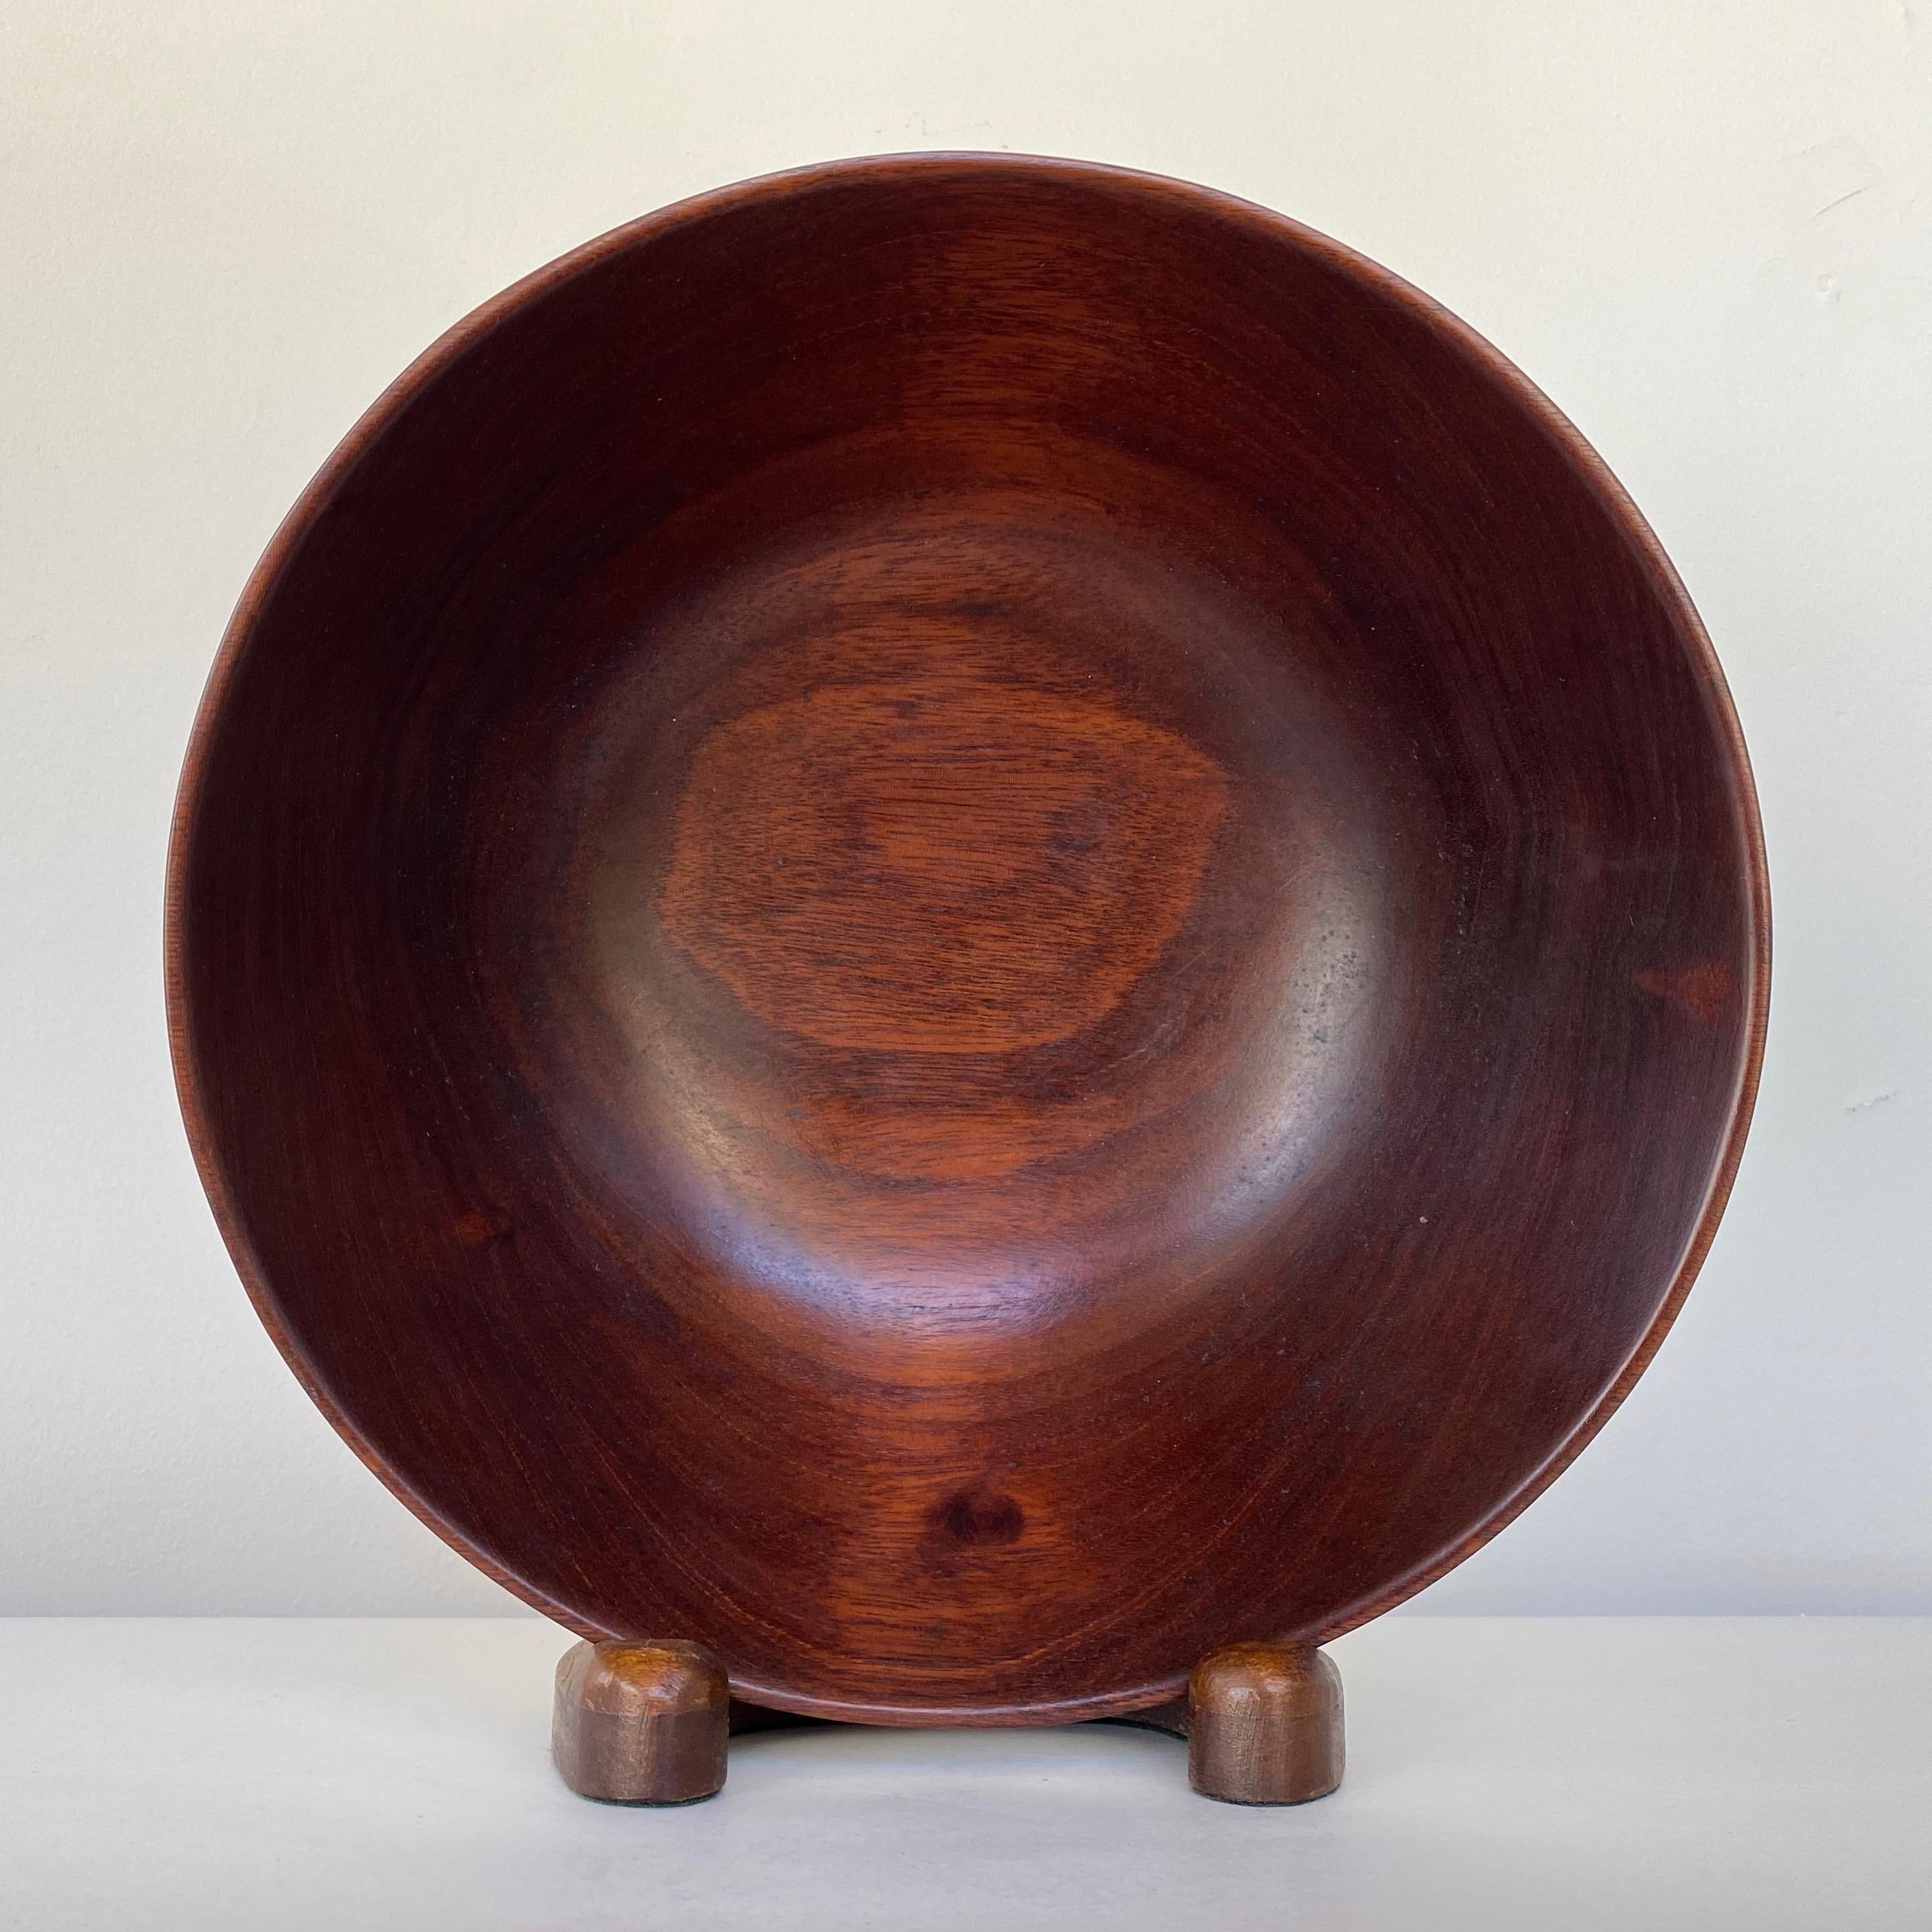 Bob Stocksdale Mahogany Turned Wood Bowl, Signed, 1960s For Sale 8